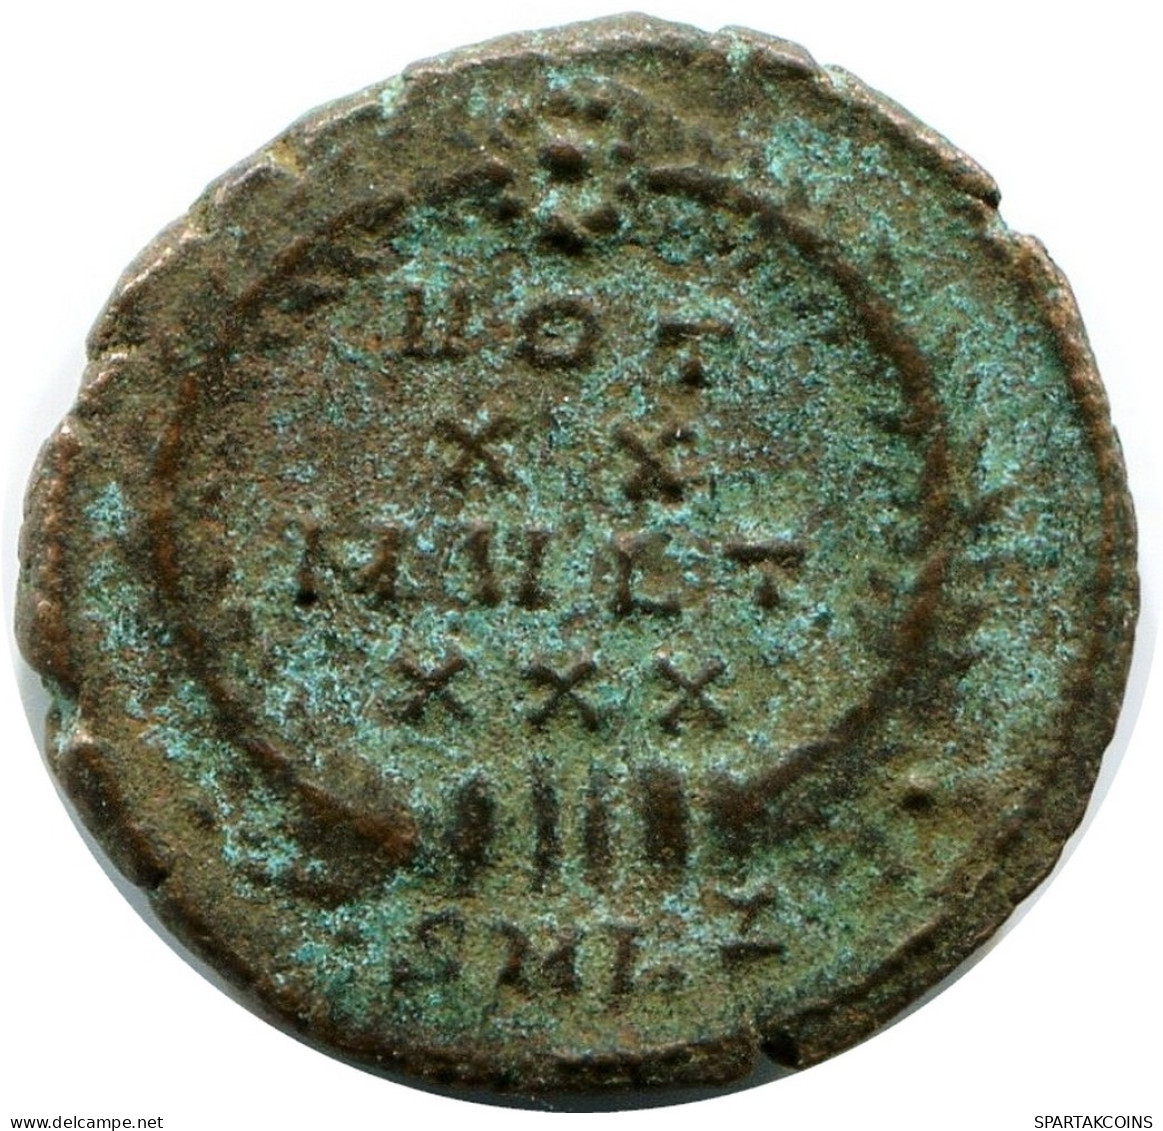 CONSTANS MINTED IN NICOMEDIA FROM THE ROYAL ONTARIO MUSEUM #ANC11753.14.D.A - Der Christlischen Kaiser (307 / 363)